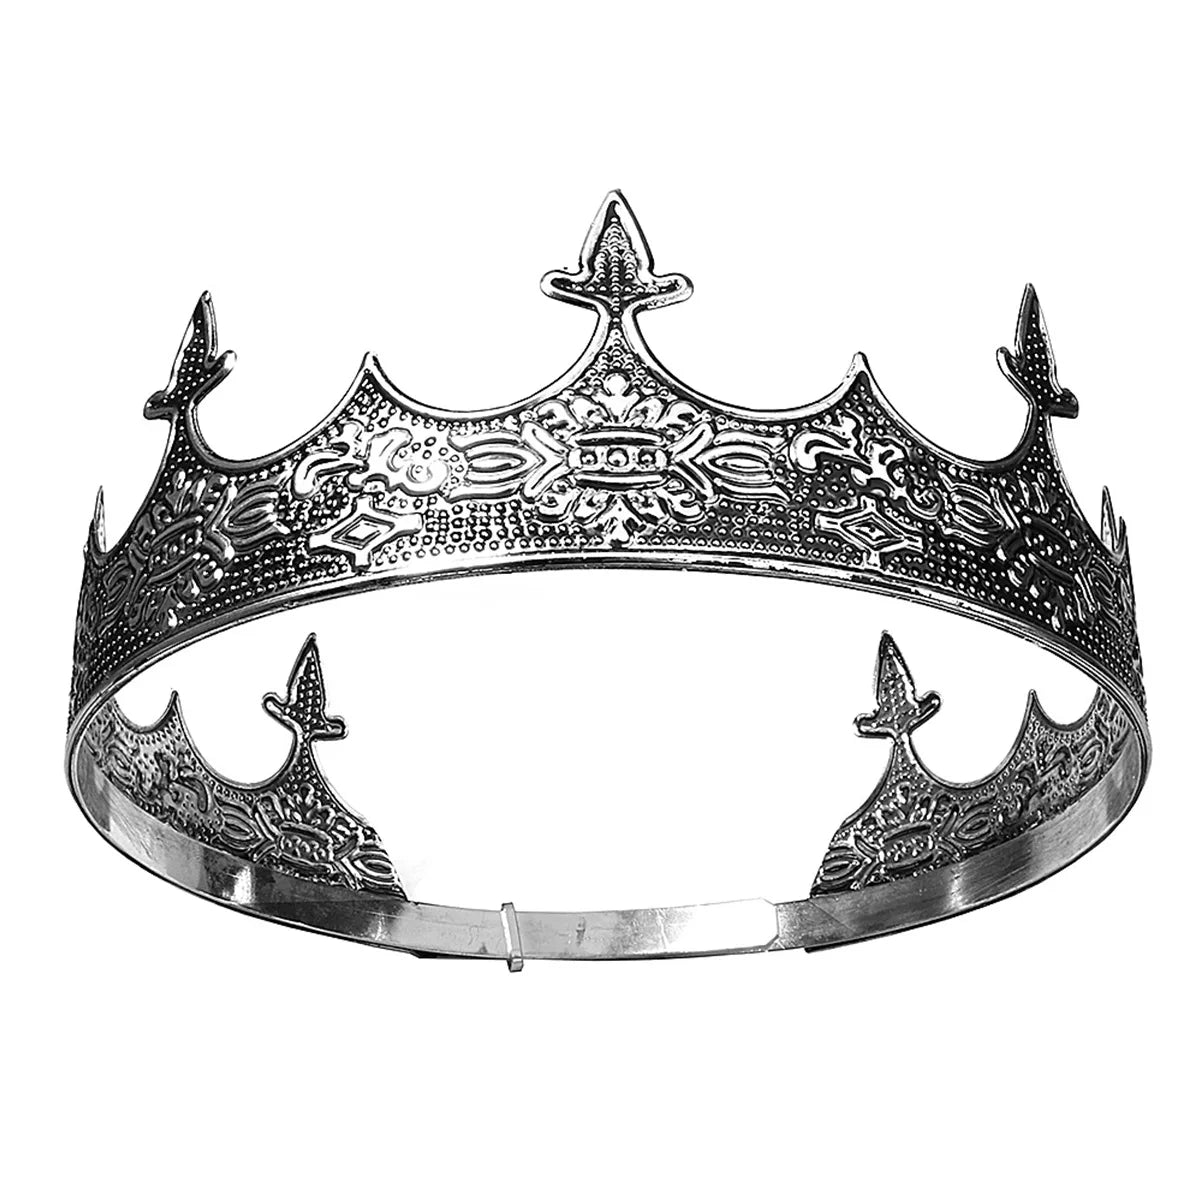 Embrace Regal Splendor: Royal King & Queen Metal Crowns and Tiaras for Unforgettable Moments!